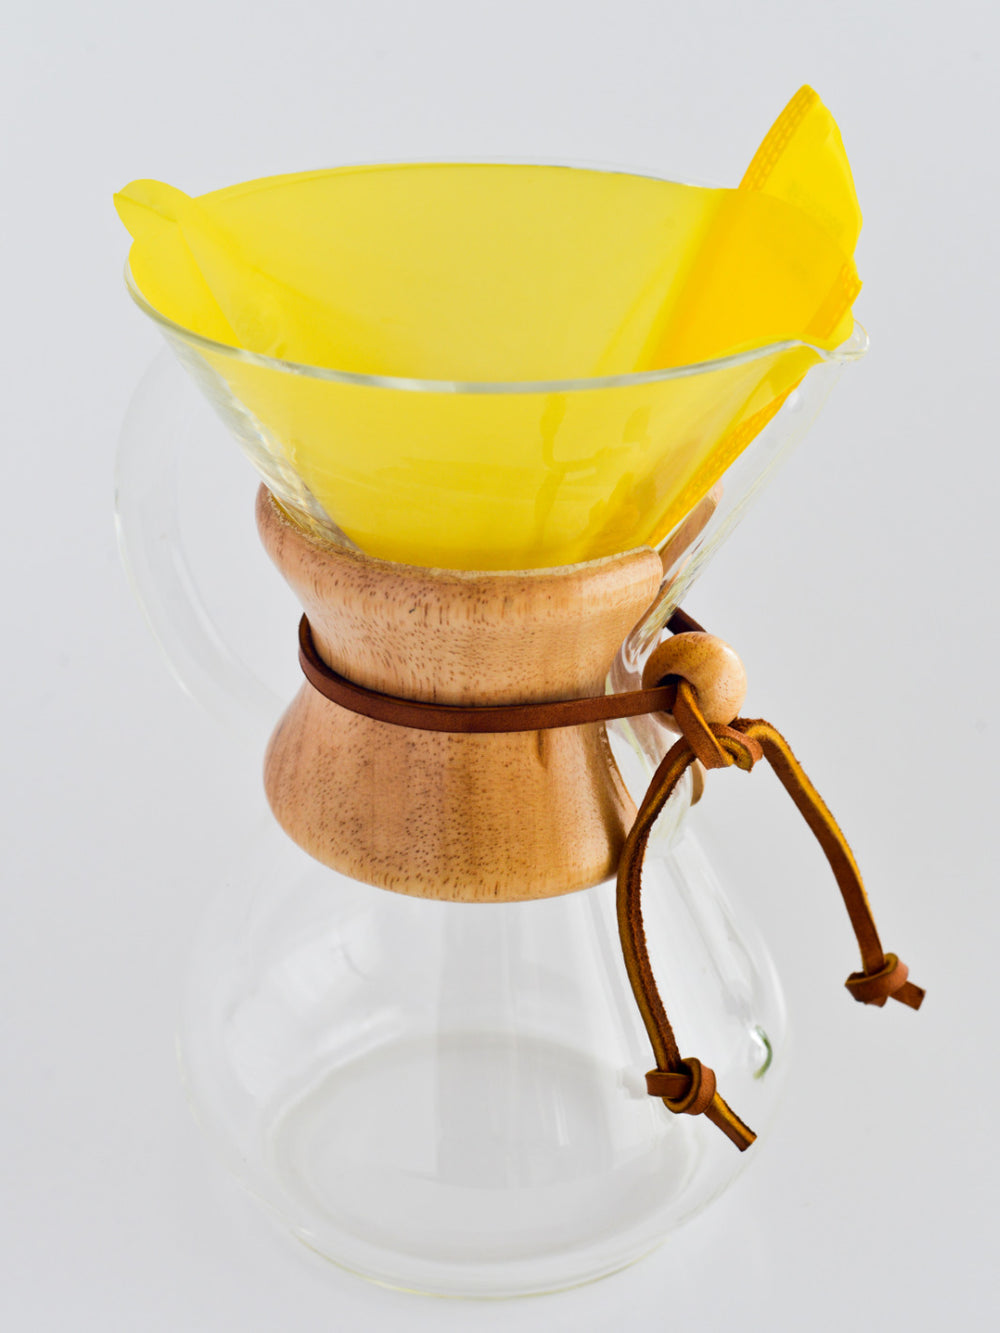 https://cdn.shopify.com/s/files/1/2404/0687/products/precise-brew_chemex-6cup_side-view.jpg?v=1655509931&width=1000